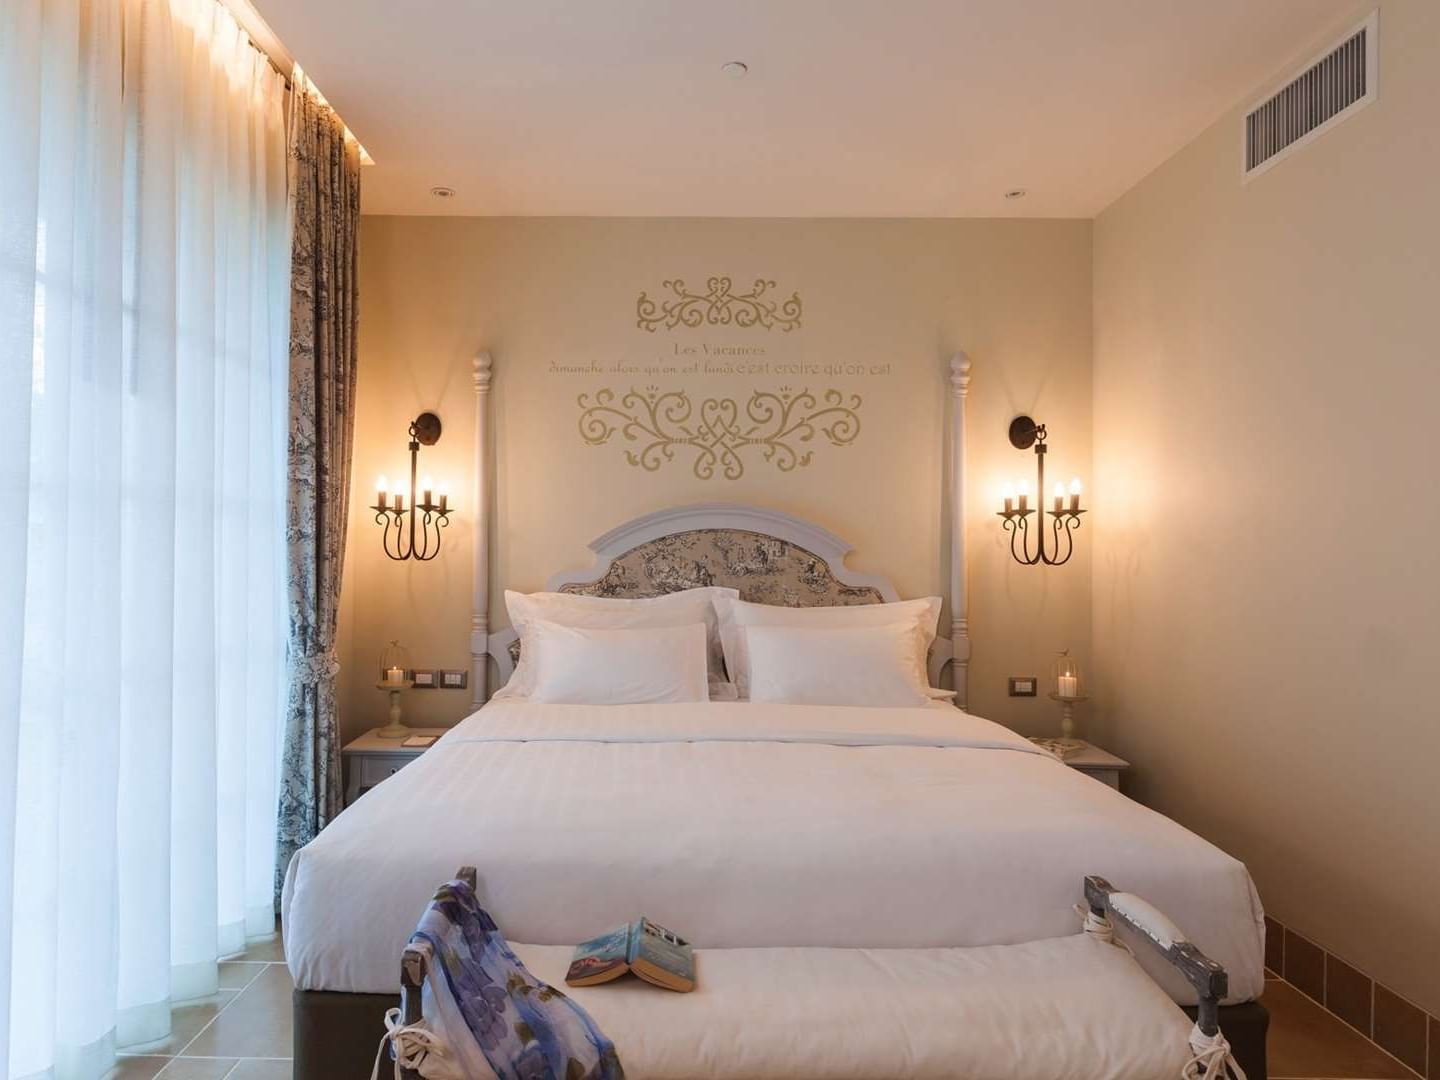 King-size bed and wall lamps in Suite at U Hotels and Resorts